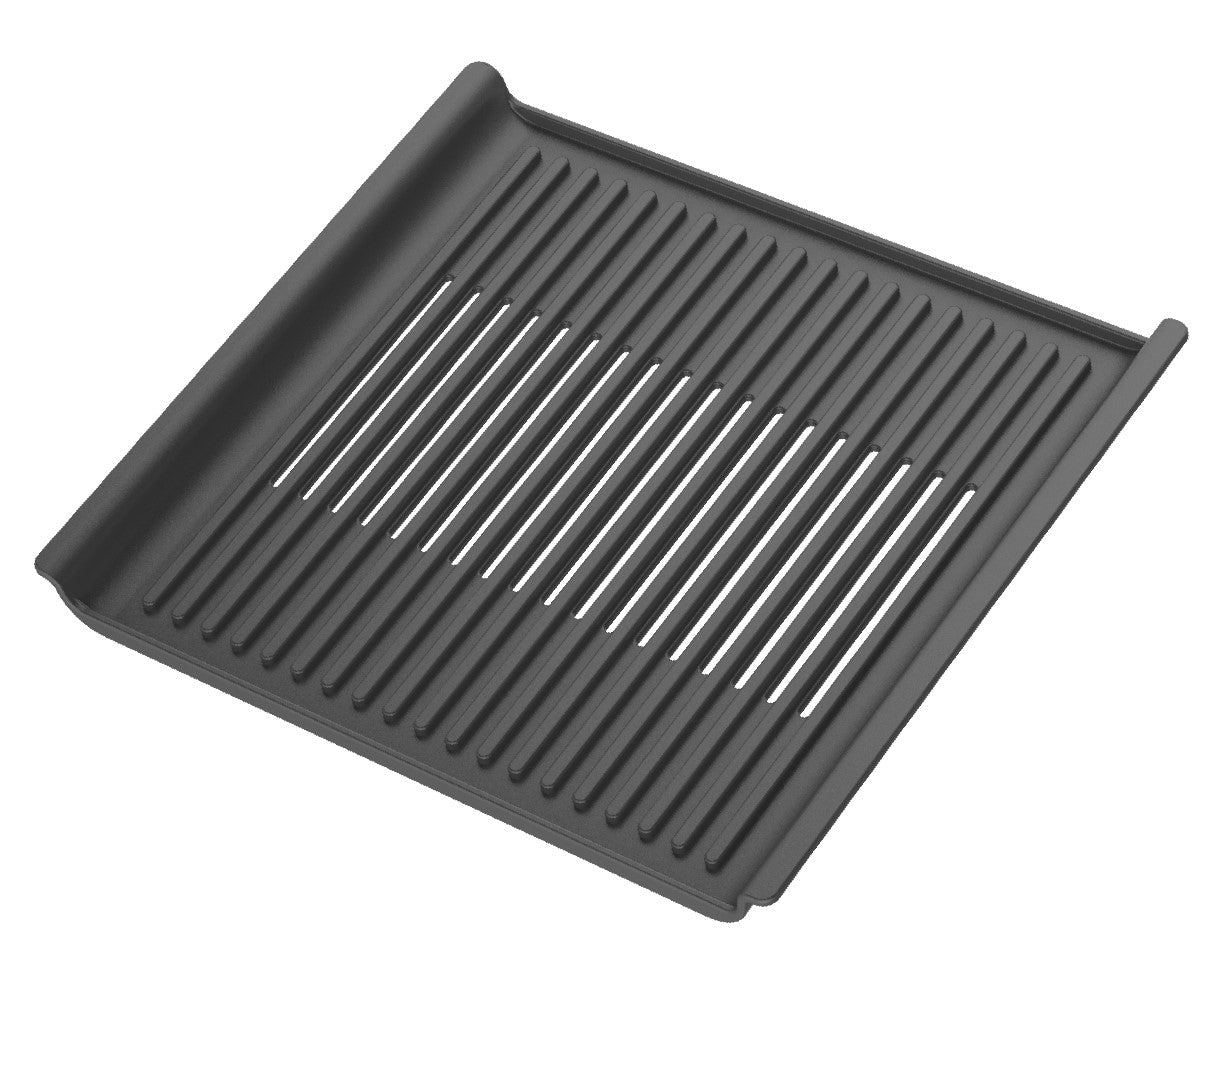 Grill Tray for GW44805 Air Fryer Oven - GoWISE USA